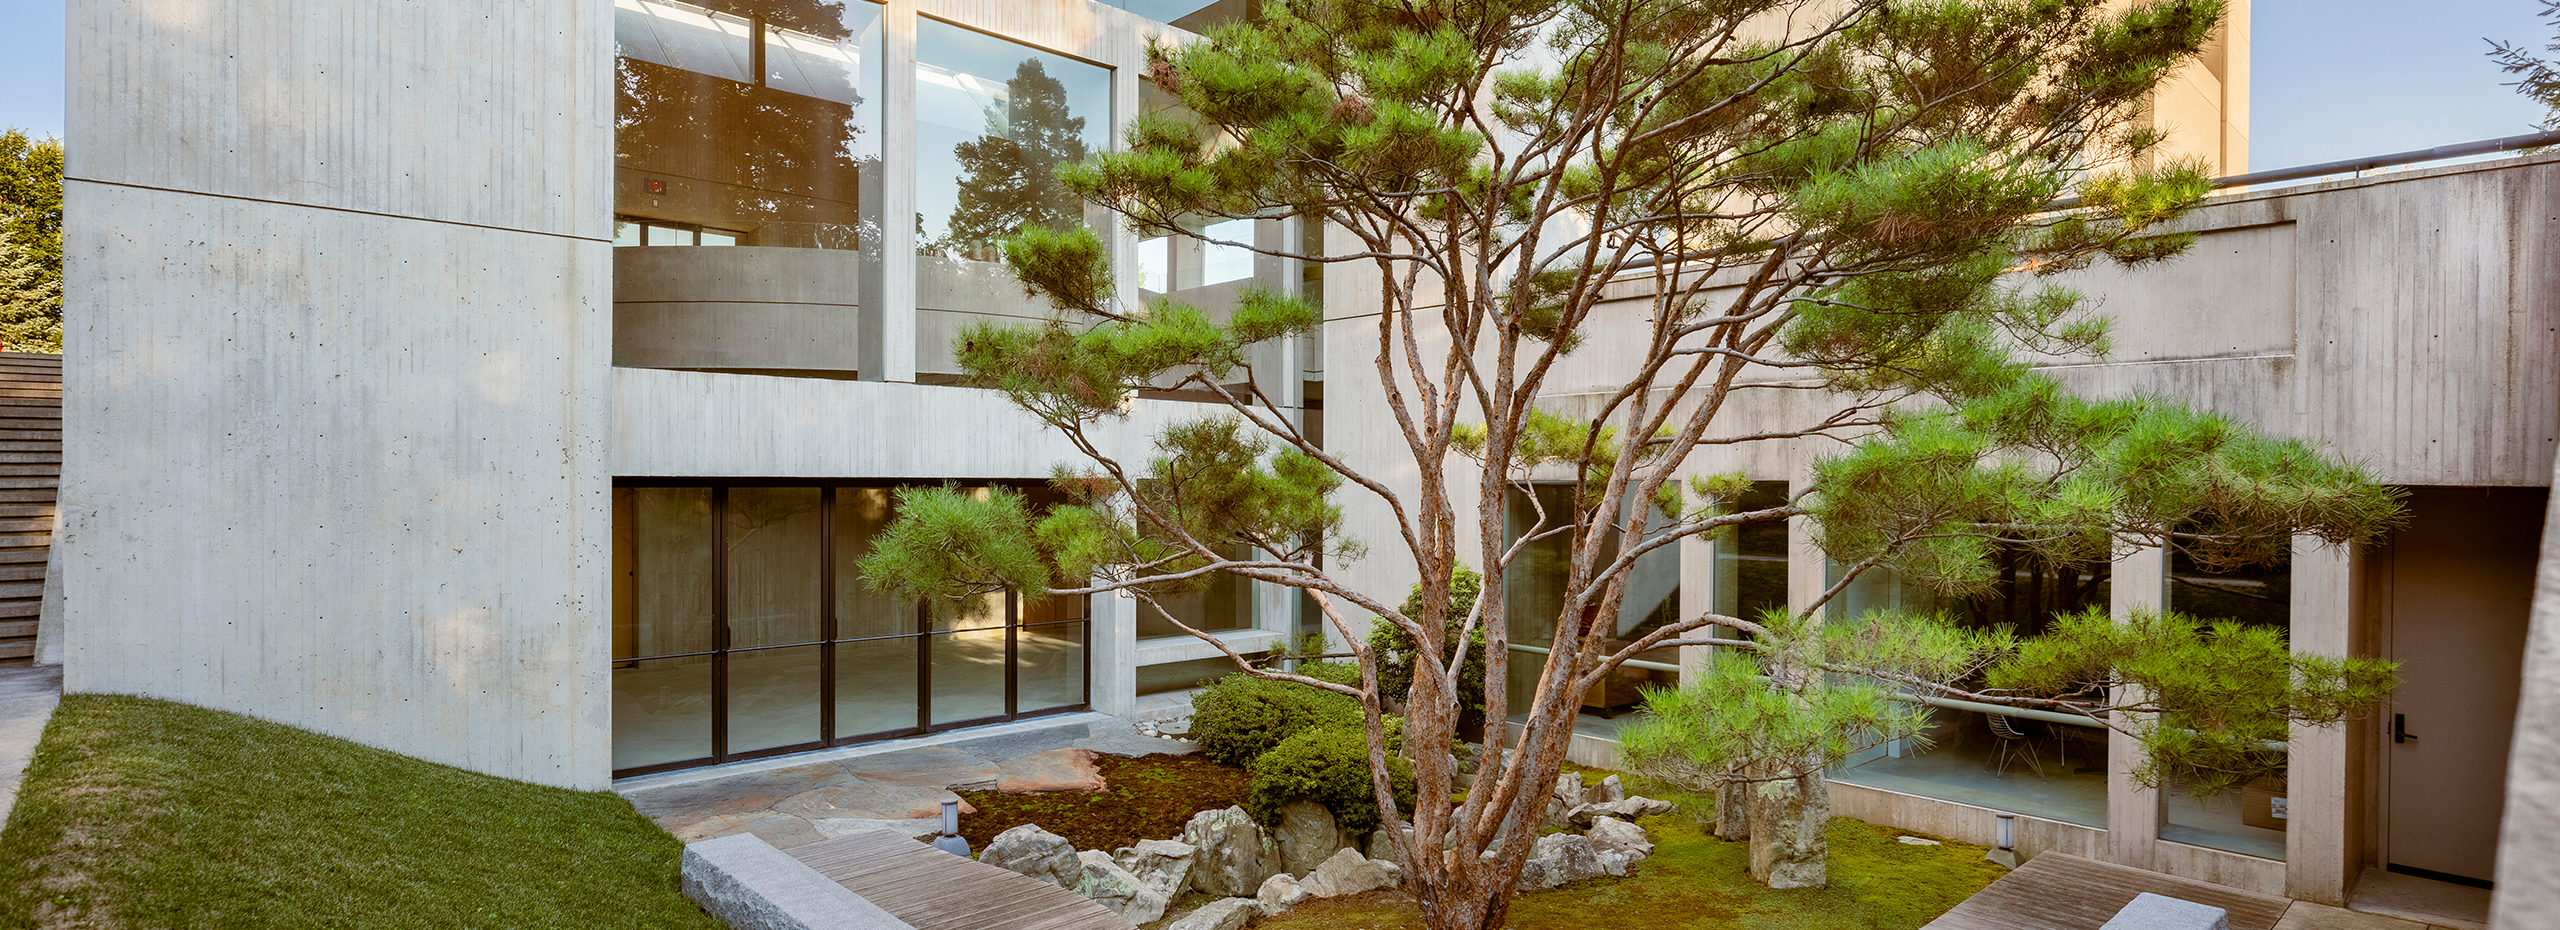 A tall tree is the focal point of a garden in between two concrete buildings